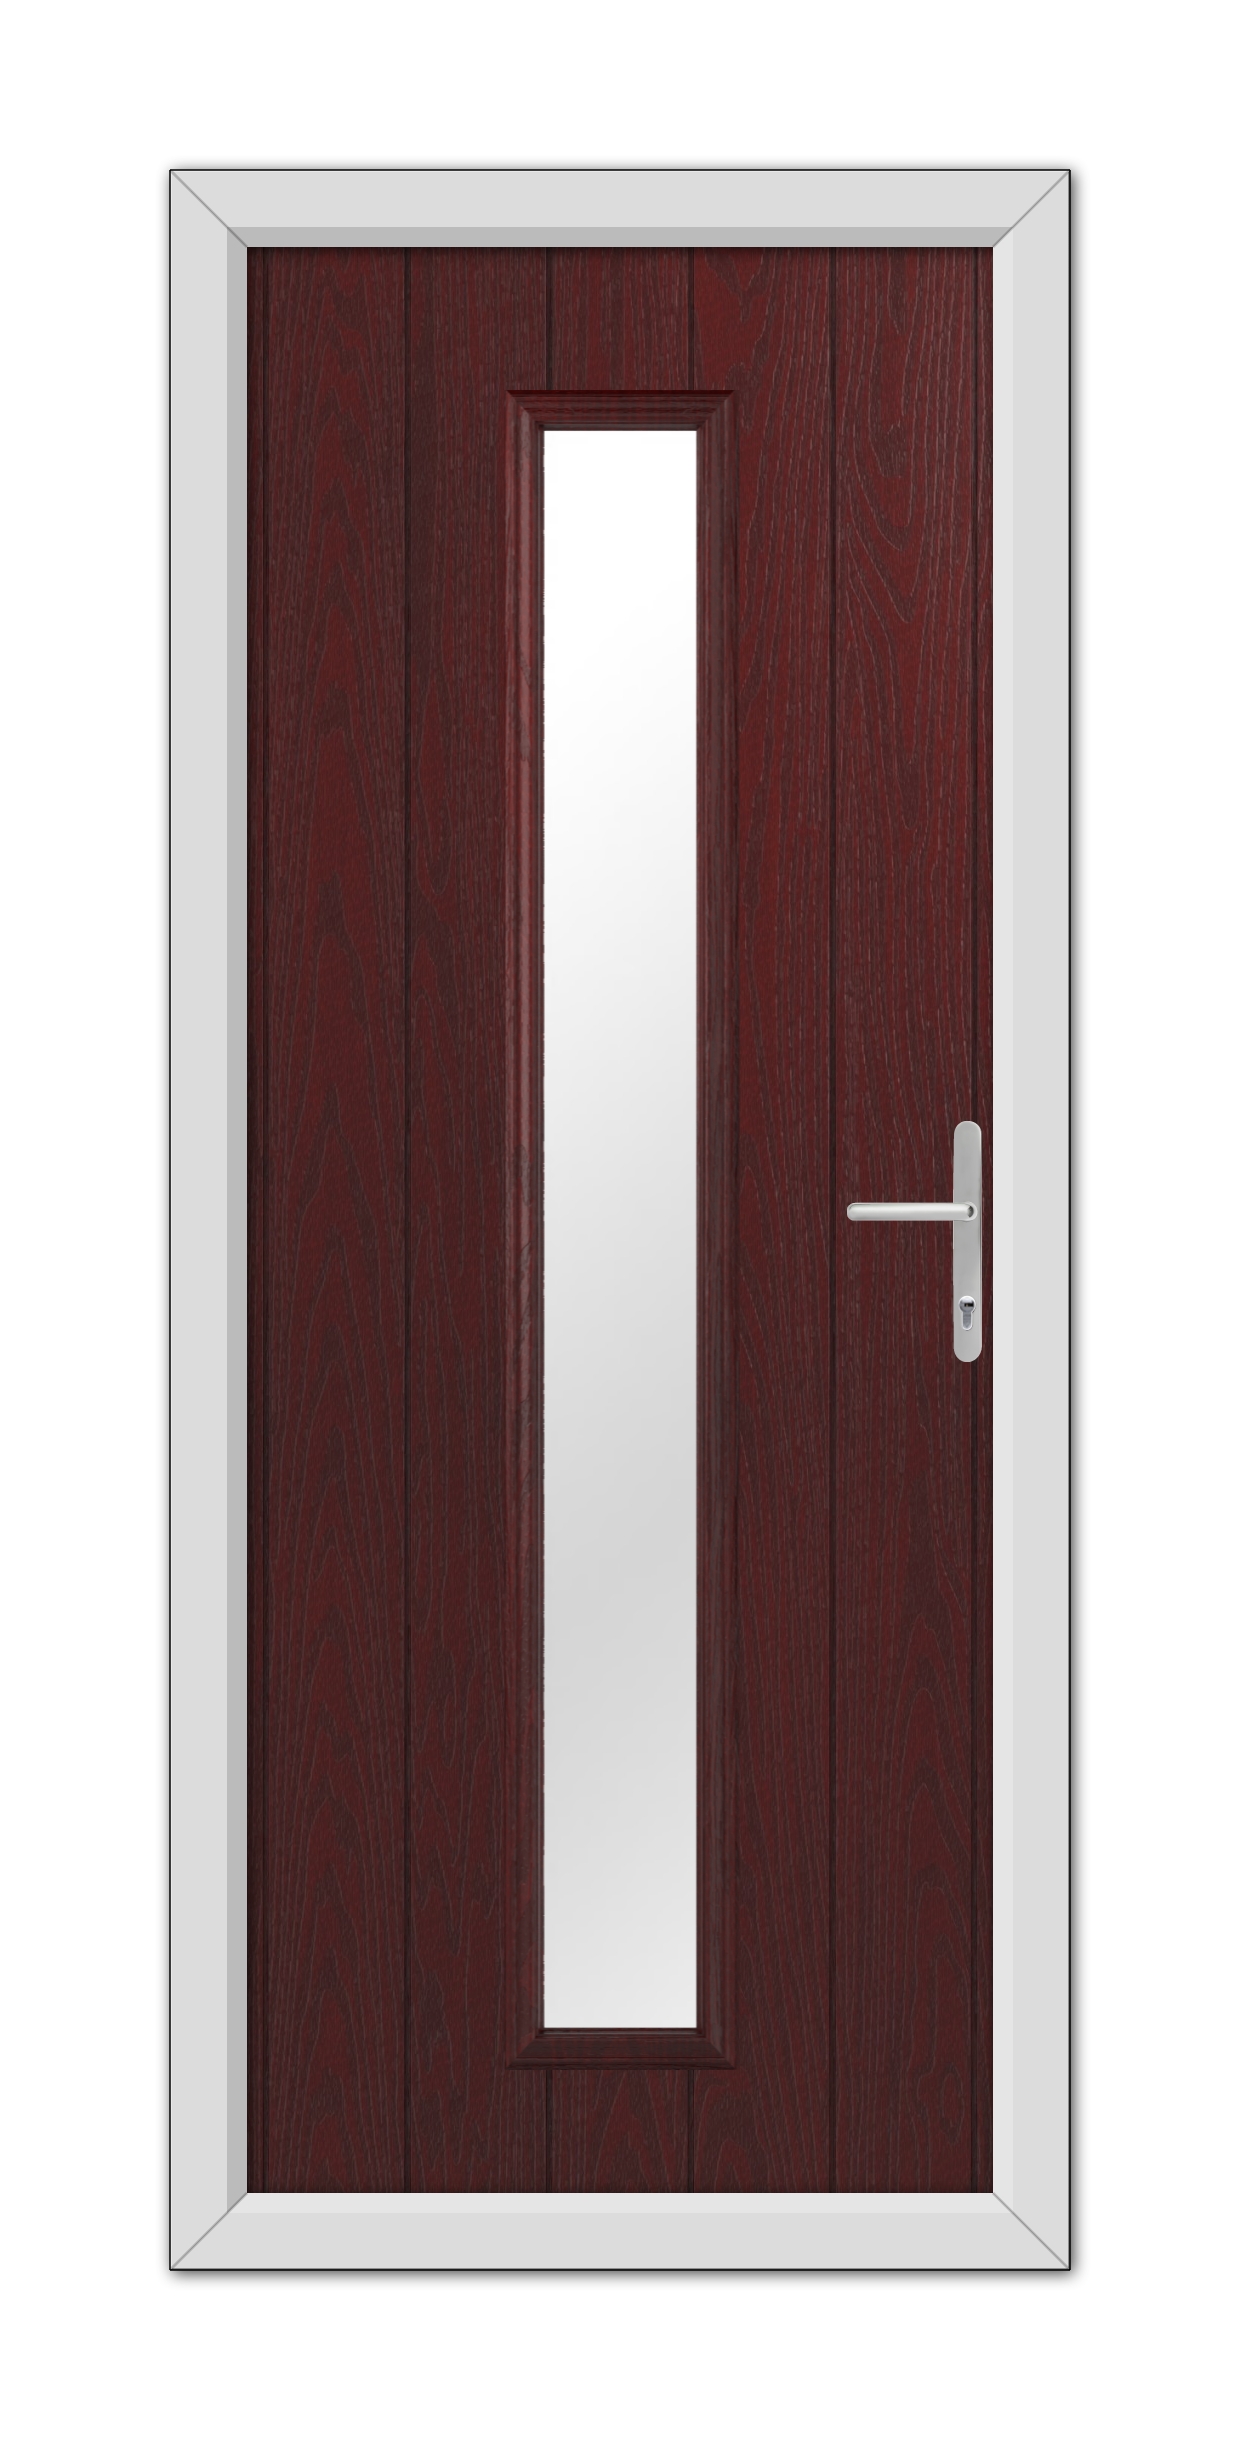 A modern Rosewood Rutland Composite Door 48mm Timber Core with a vertical glass panel and white handle, set within a white frame.